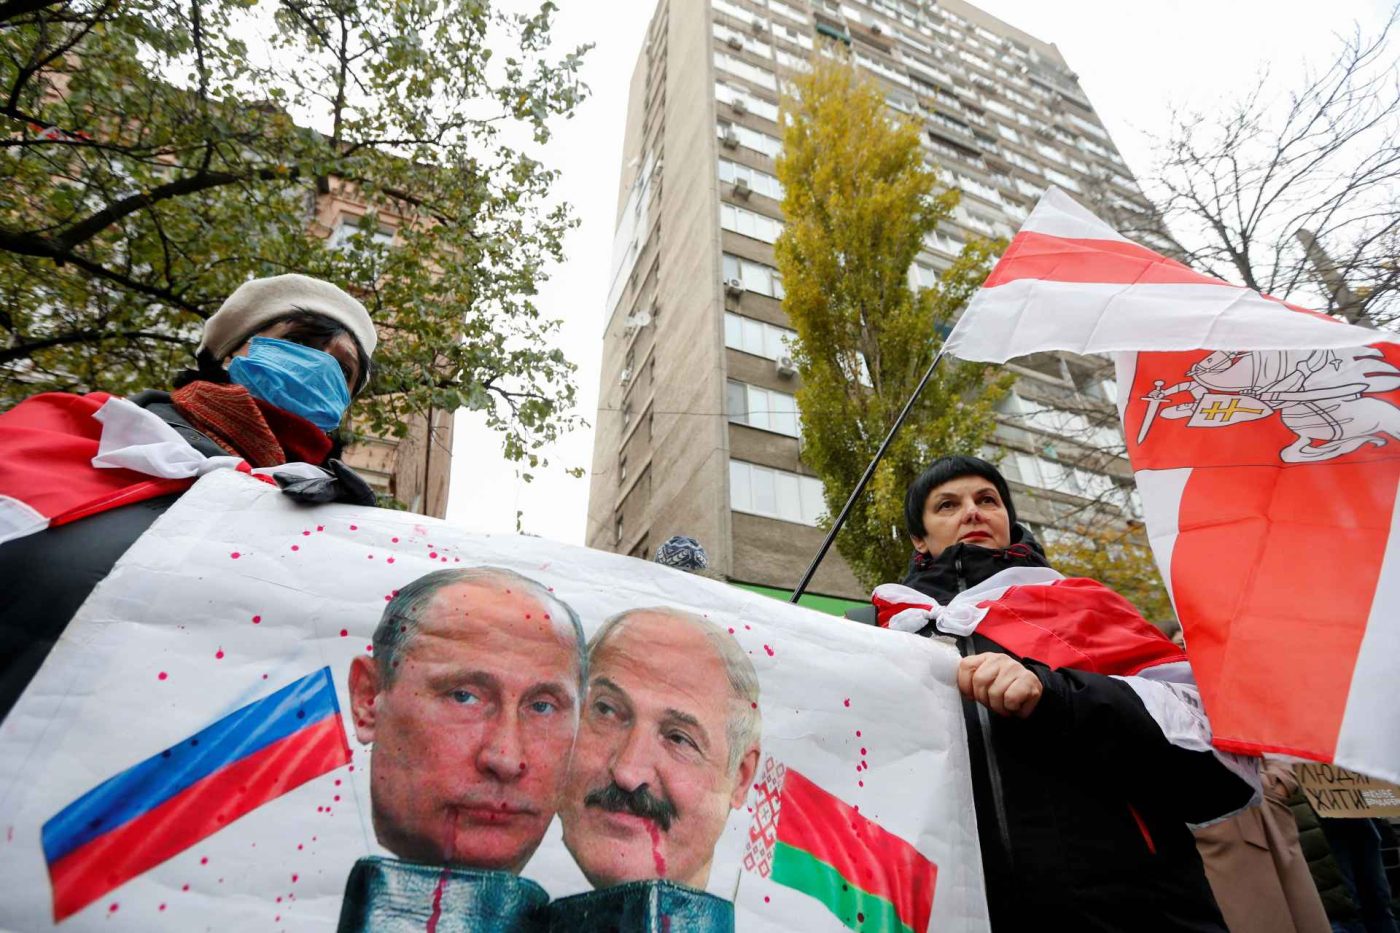 Photo: People gather to mourn the death of Belarusian anti-government protester Roman Bondarenko, who was allegedly beaten by the country's security forces in Minsk, outside the Belarusian embassy in Kyiv, Ukraine November 13, 2020. A placard displays images depicting Russian President Vladimir Putin and Belarusian President Alexander Lukashenko. Credit: REUTERS/Valentyn Ogirenko